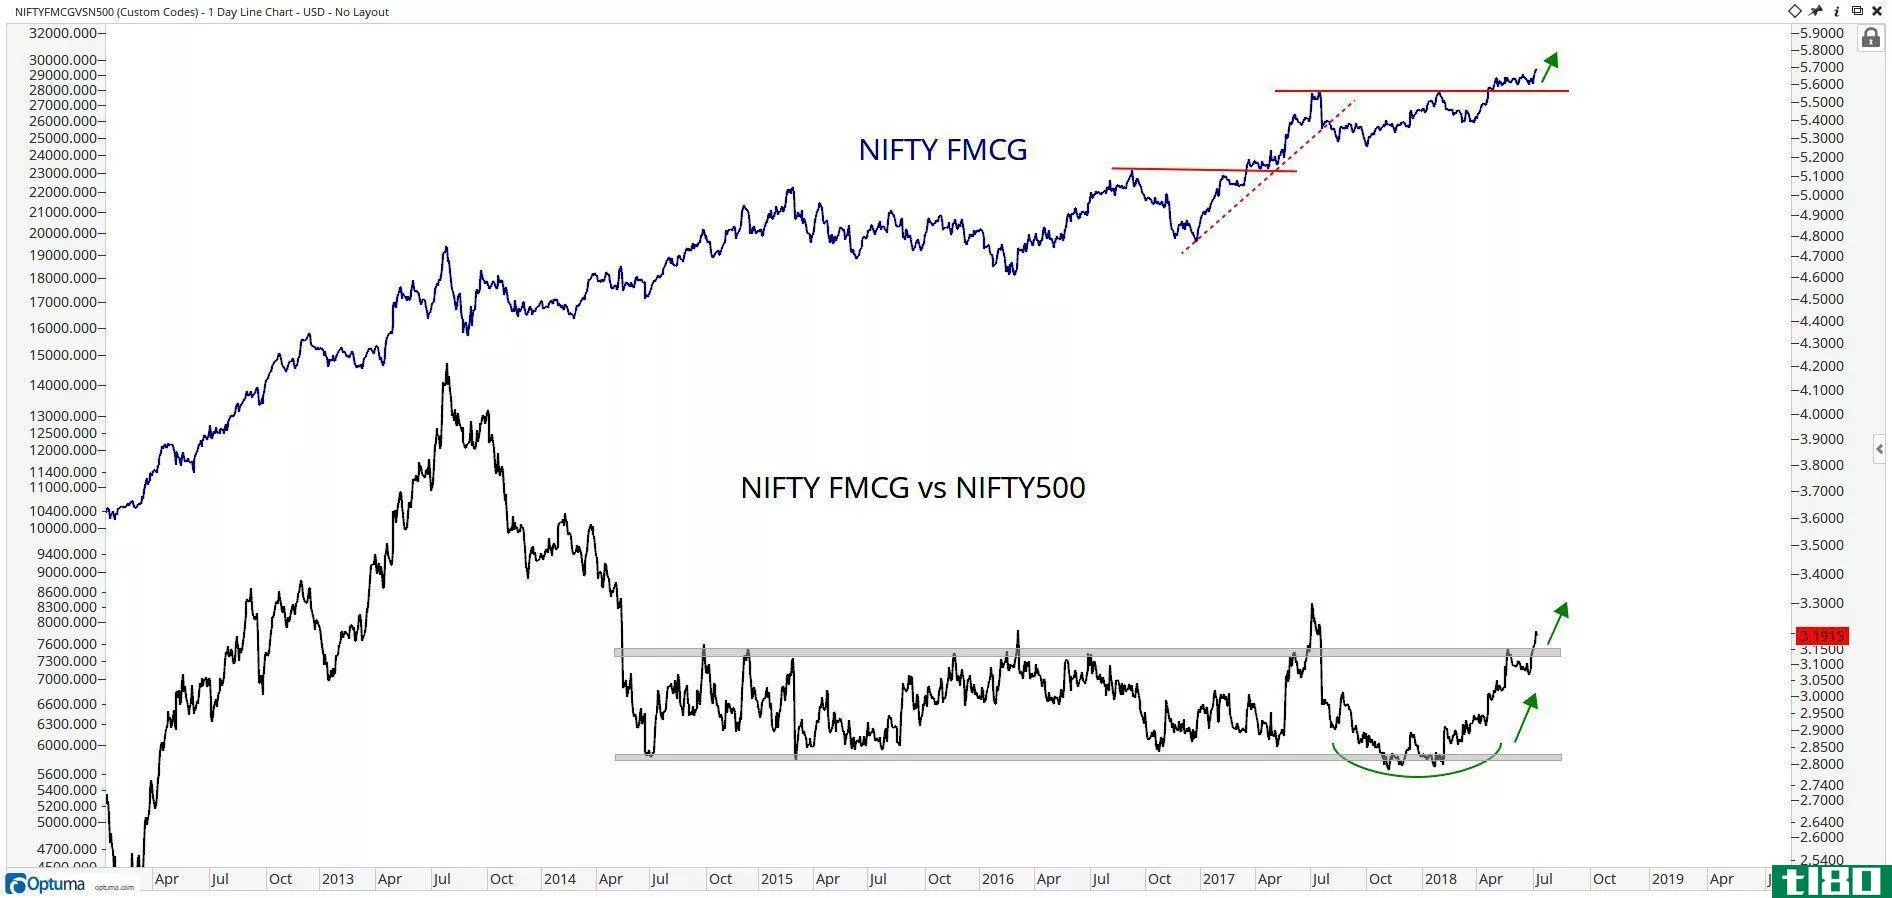 Chart showing performance of Nifty FMCG vs. Nifty 500